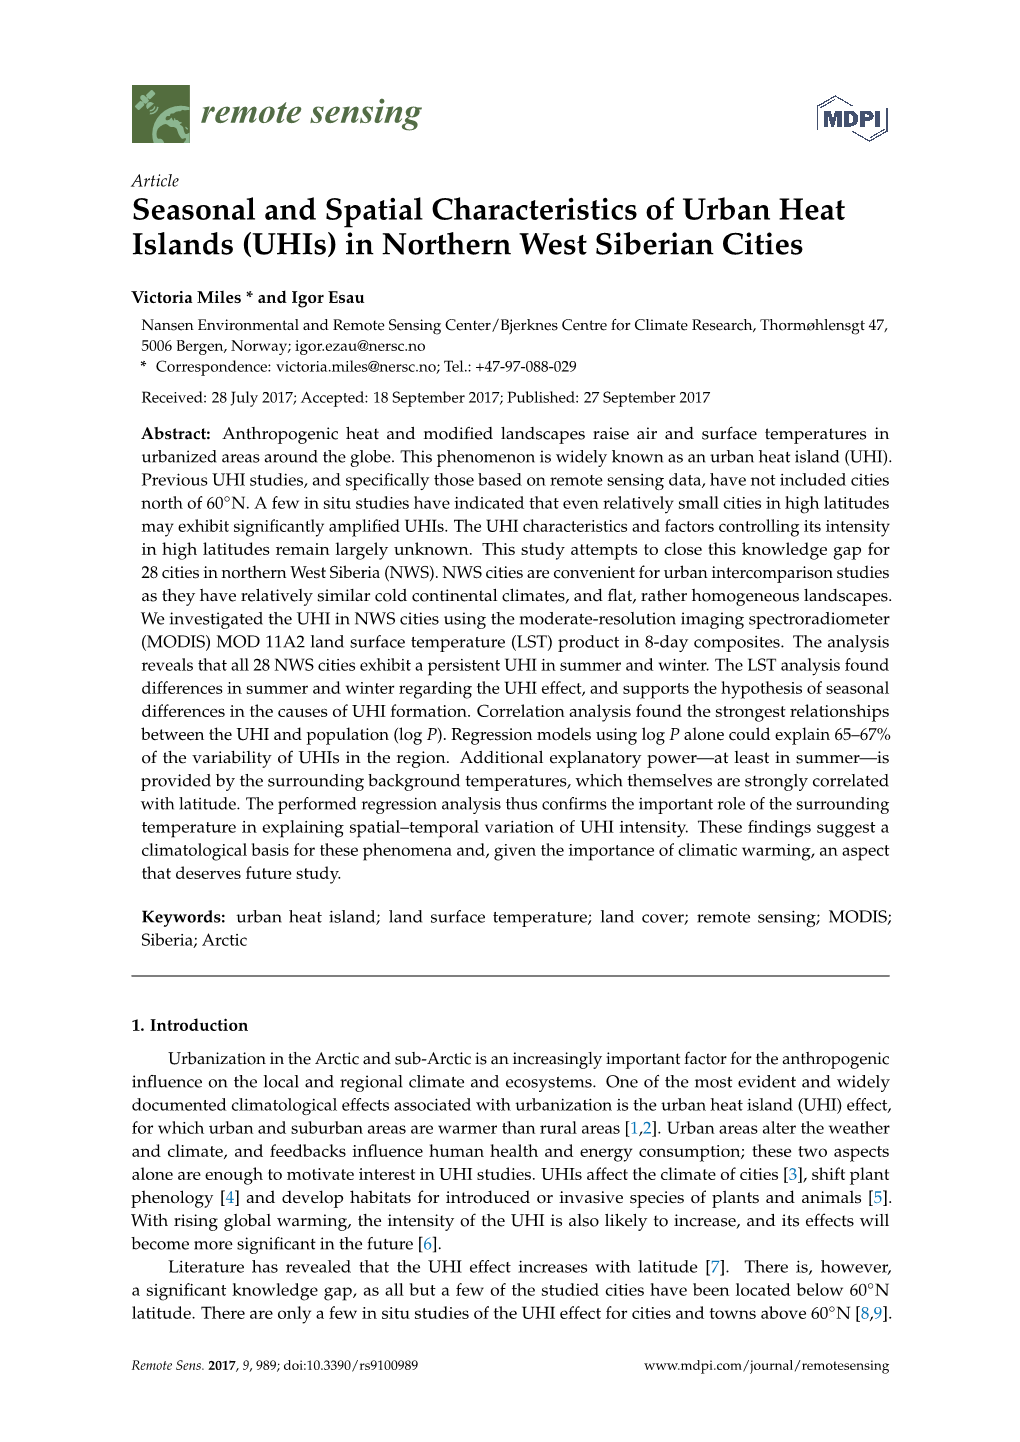 Seasonal and Spatial Characteristics of Urban Heat Islands (Uhis) in Northern West Siberian Cities